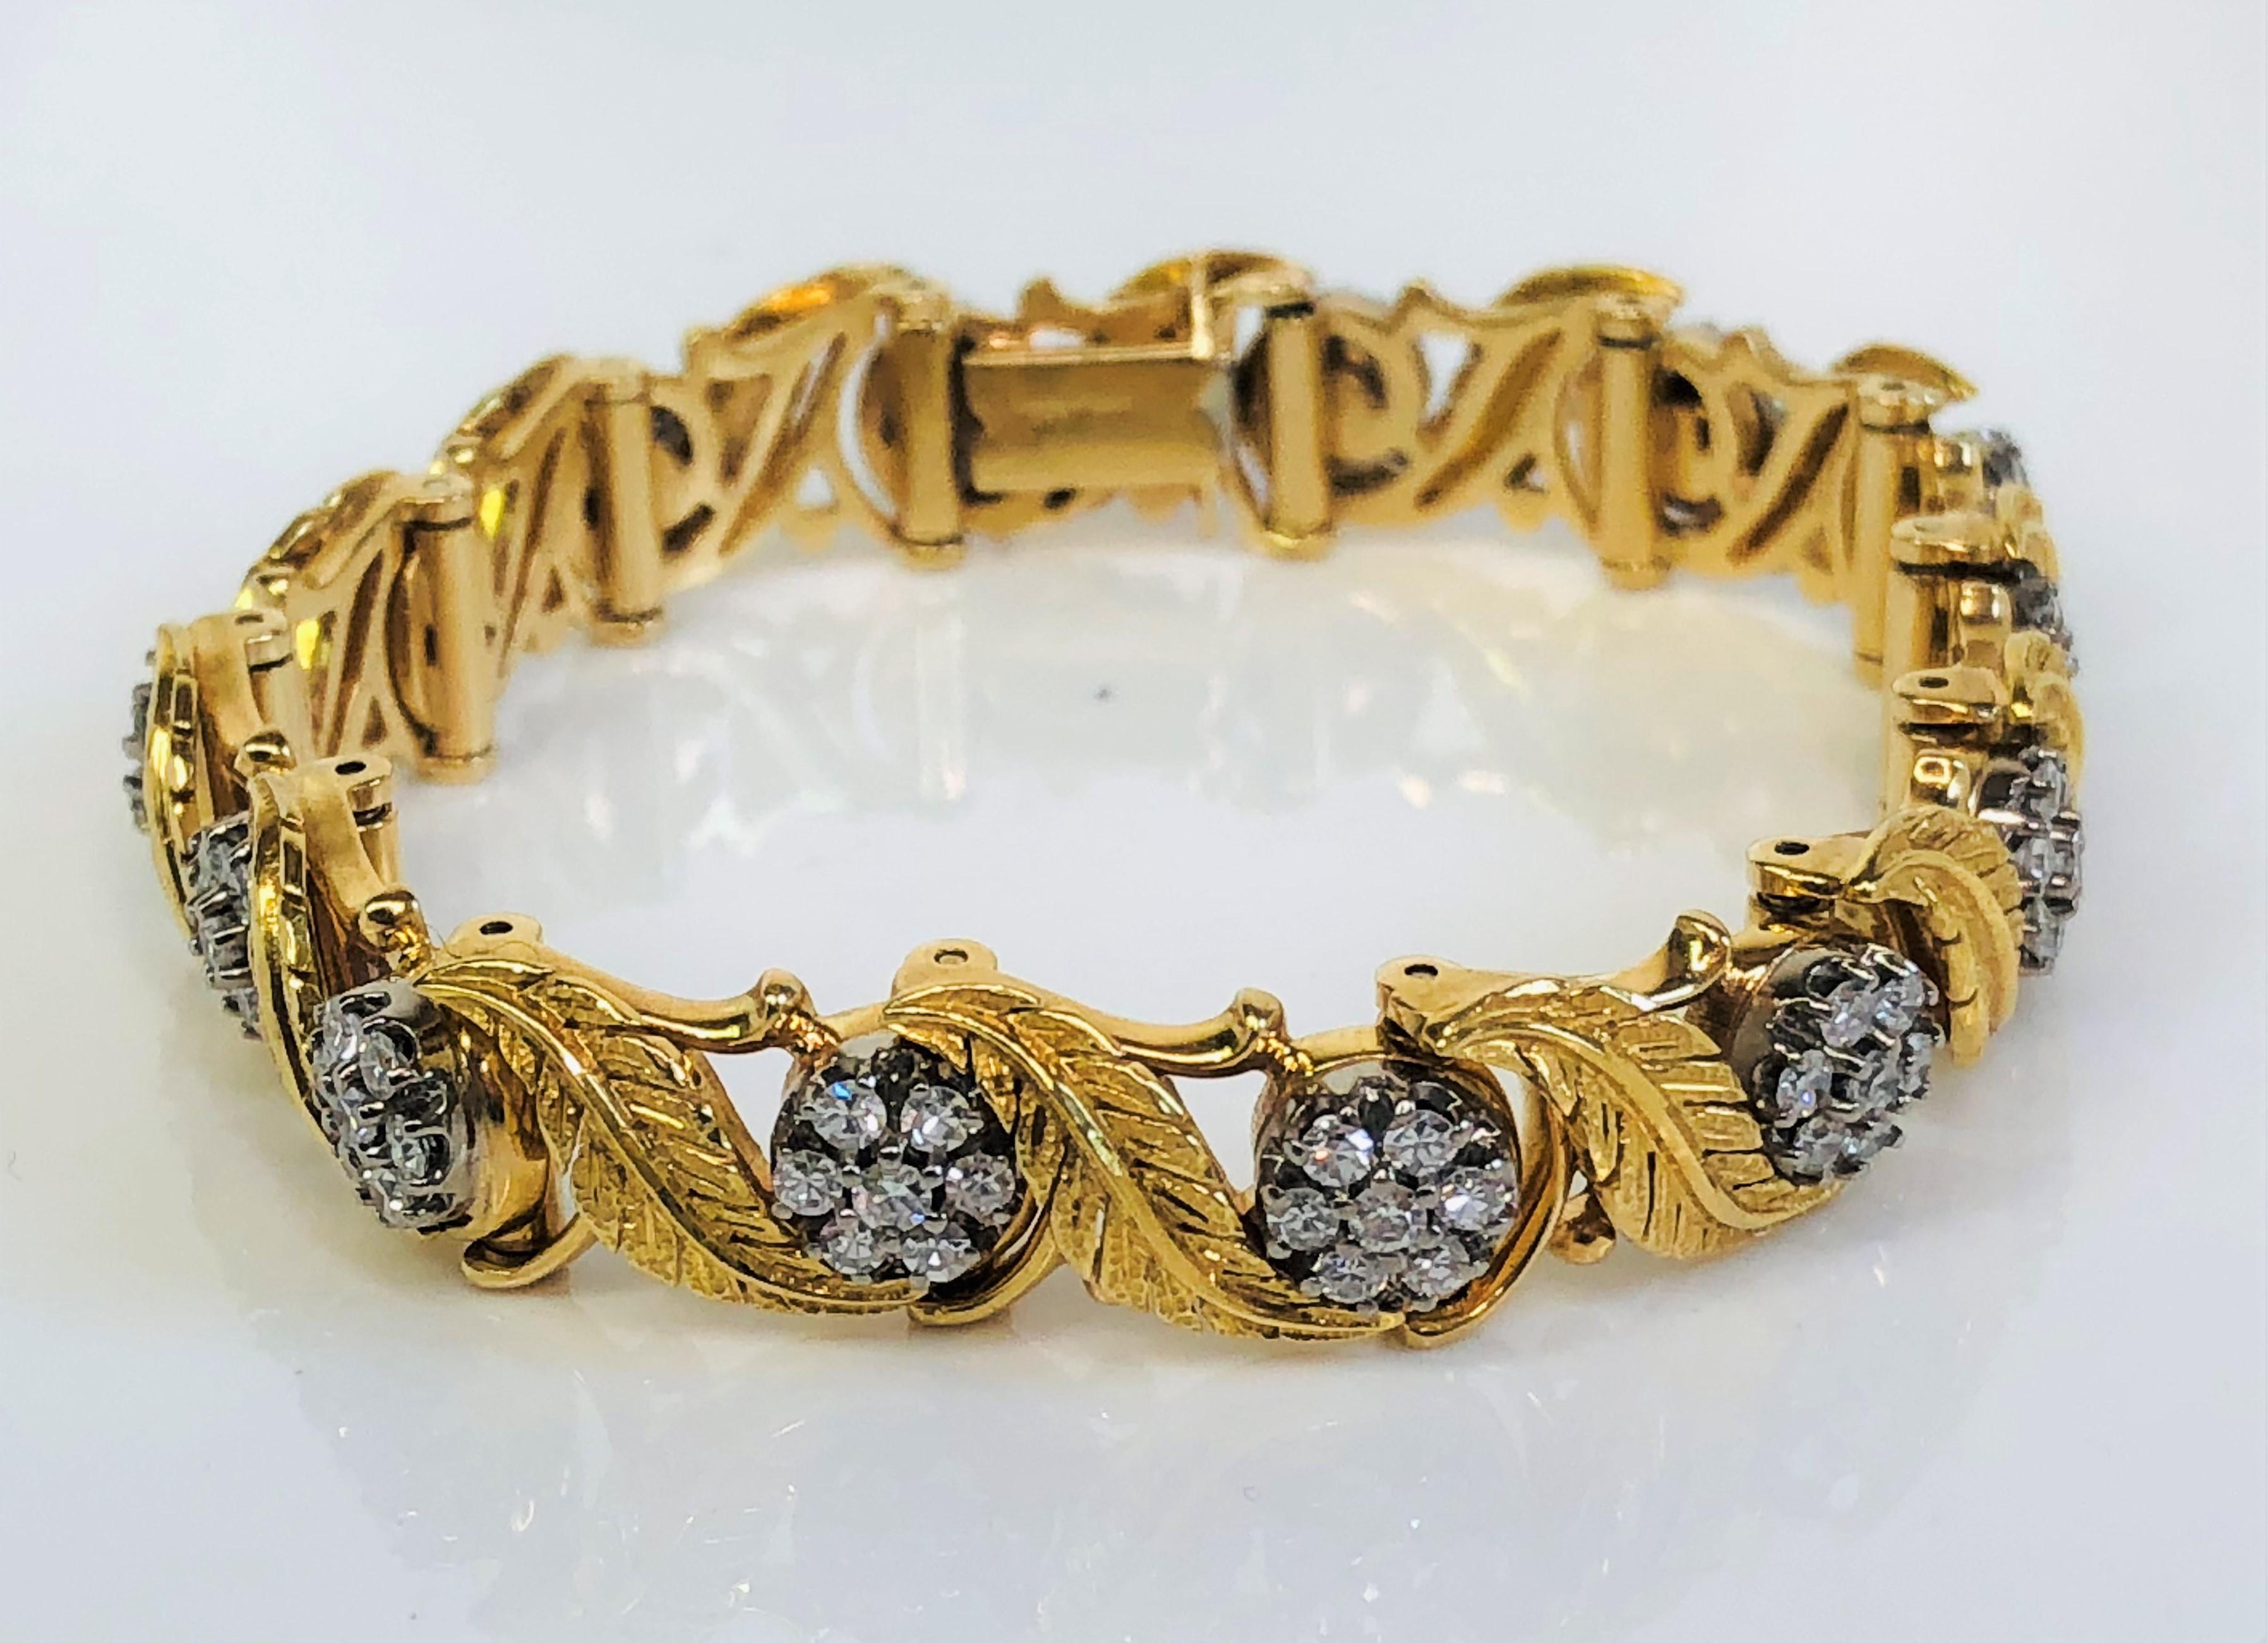 By designer Jabel, this unique bracelet is solid and well crafted.  
14 karat yellow and white gold.
98 total round prong set diamonds set in 14 